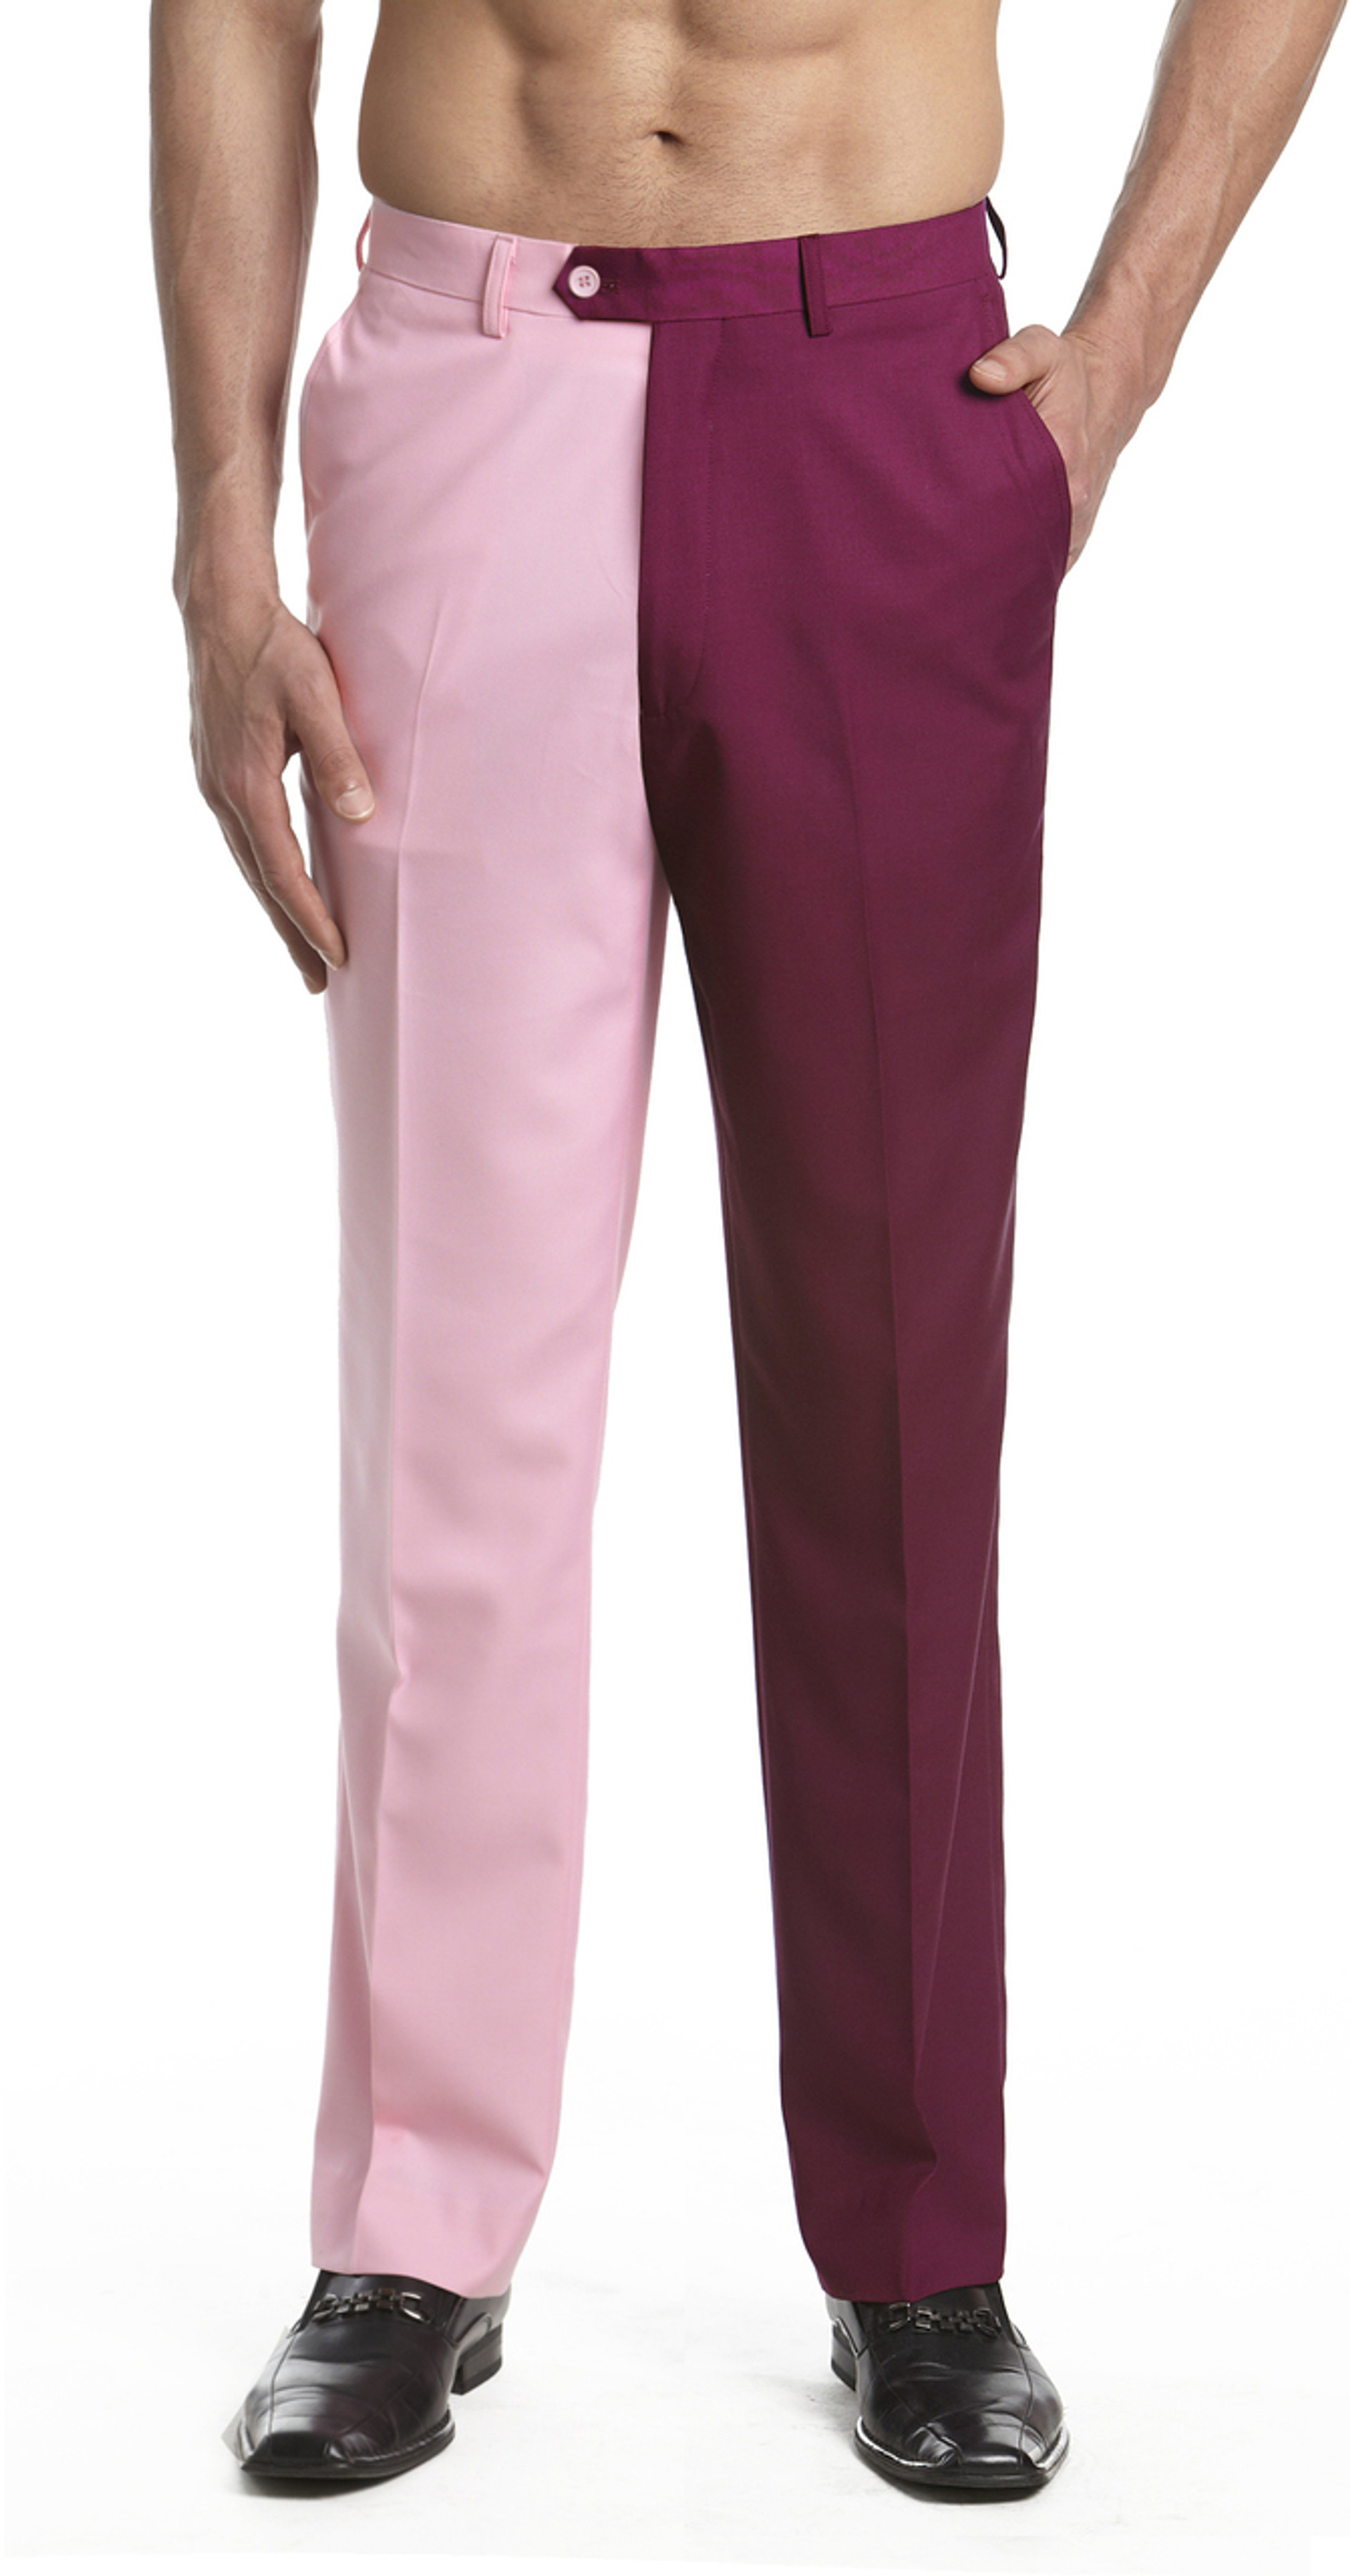 Men's Pink Dress Pants | Concitor Clothing Trousers